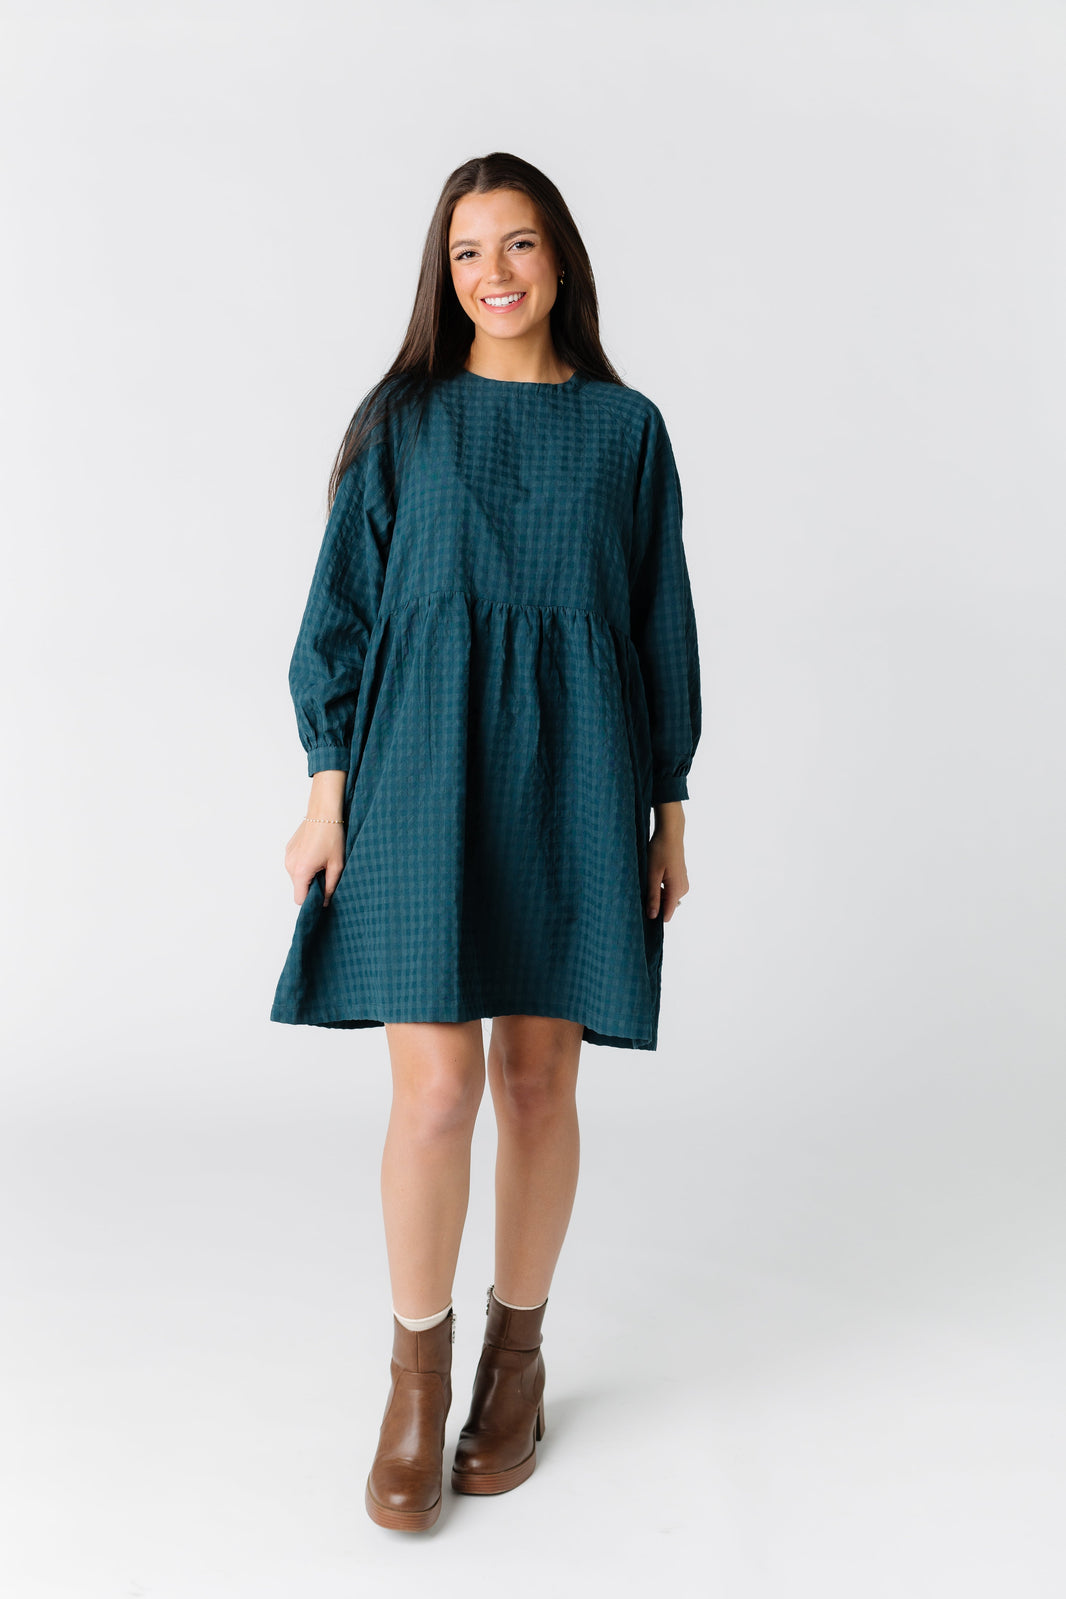 Plus Size Dresses – Called to Surf